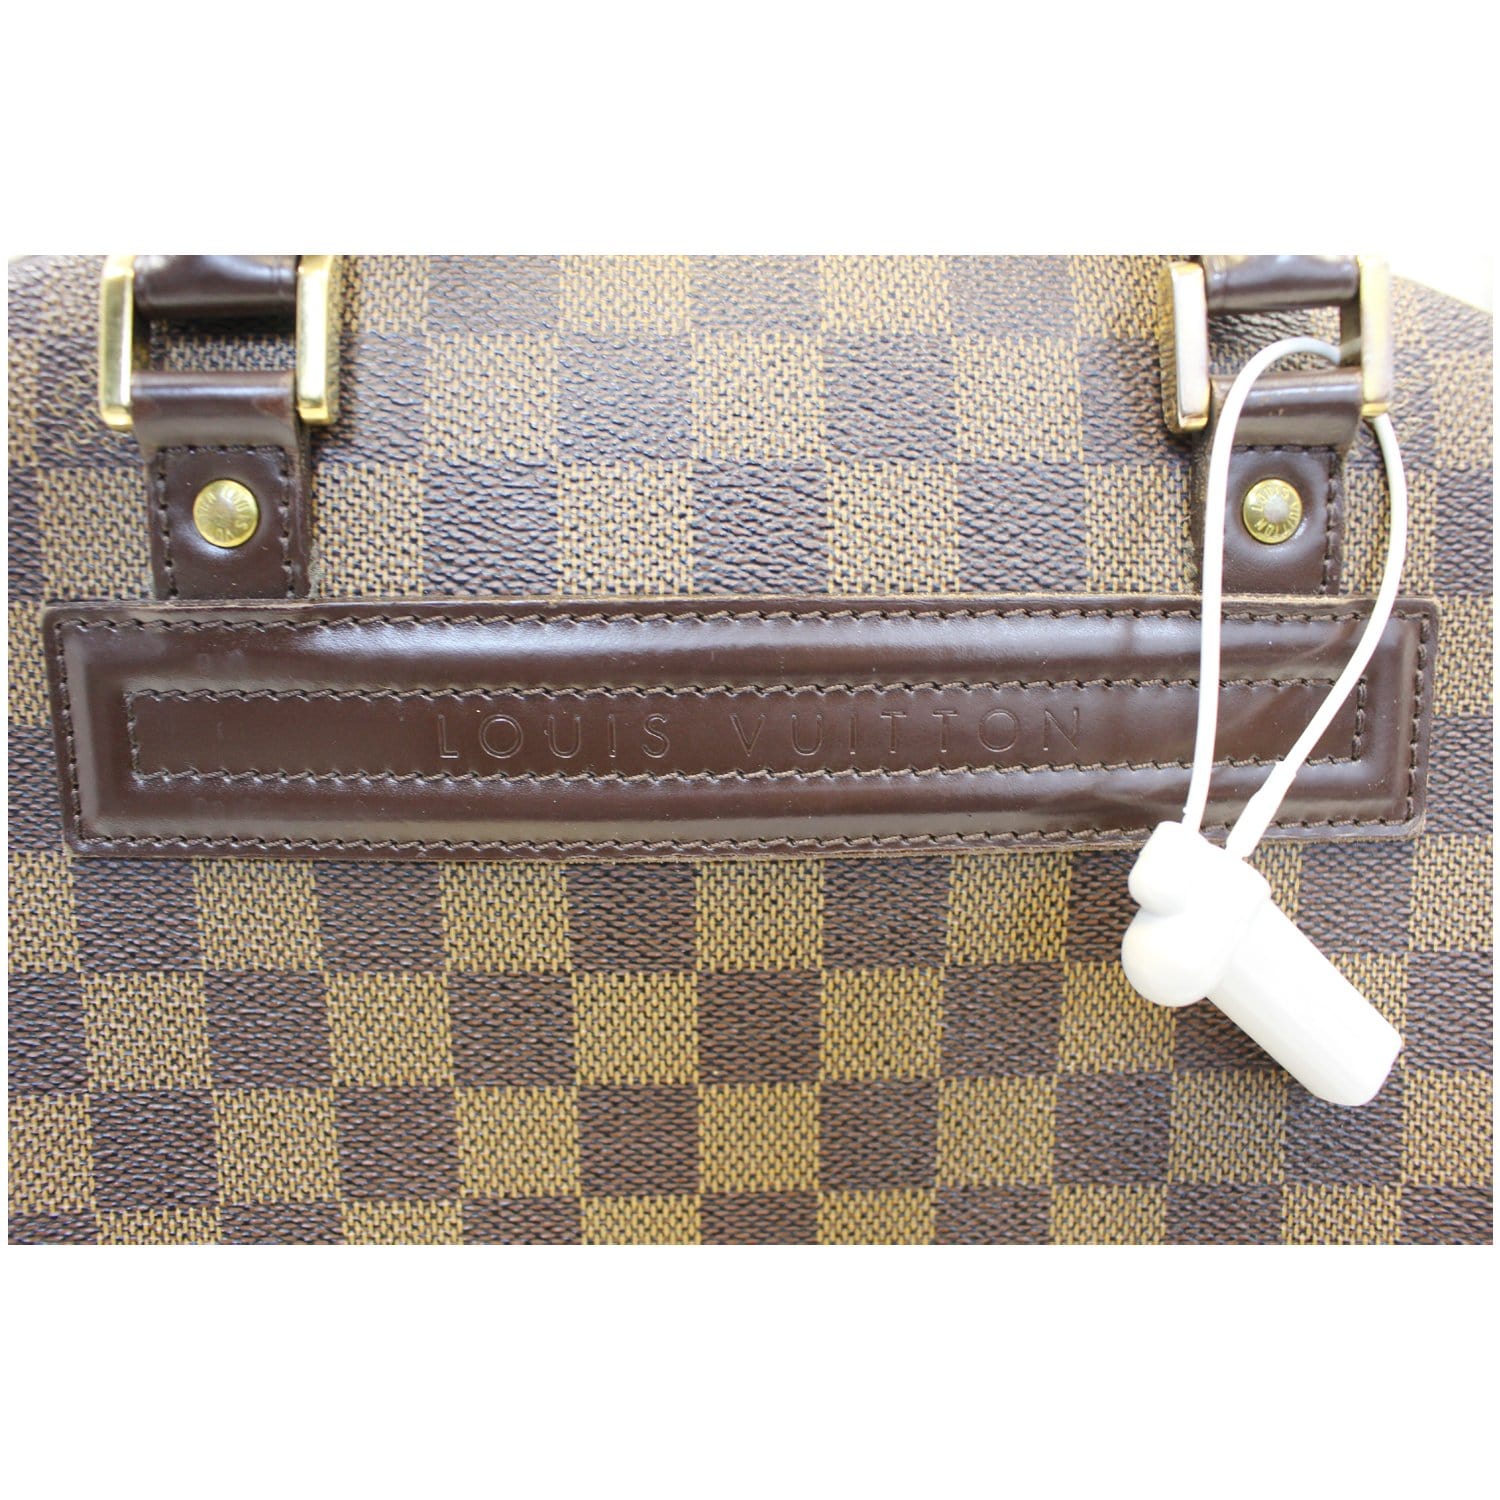 Moving out, Clearance sale! Authentic Designer Brand Louis Vuitton LV Brown  Damier Ebene Nolita Leather Weekend Travel Luggage Shoulder Sling Tote Bag